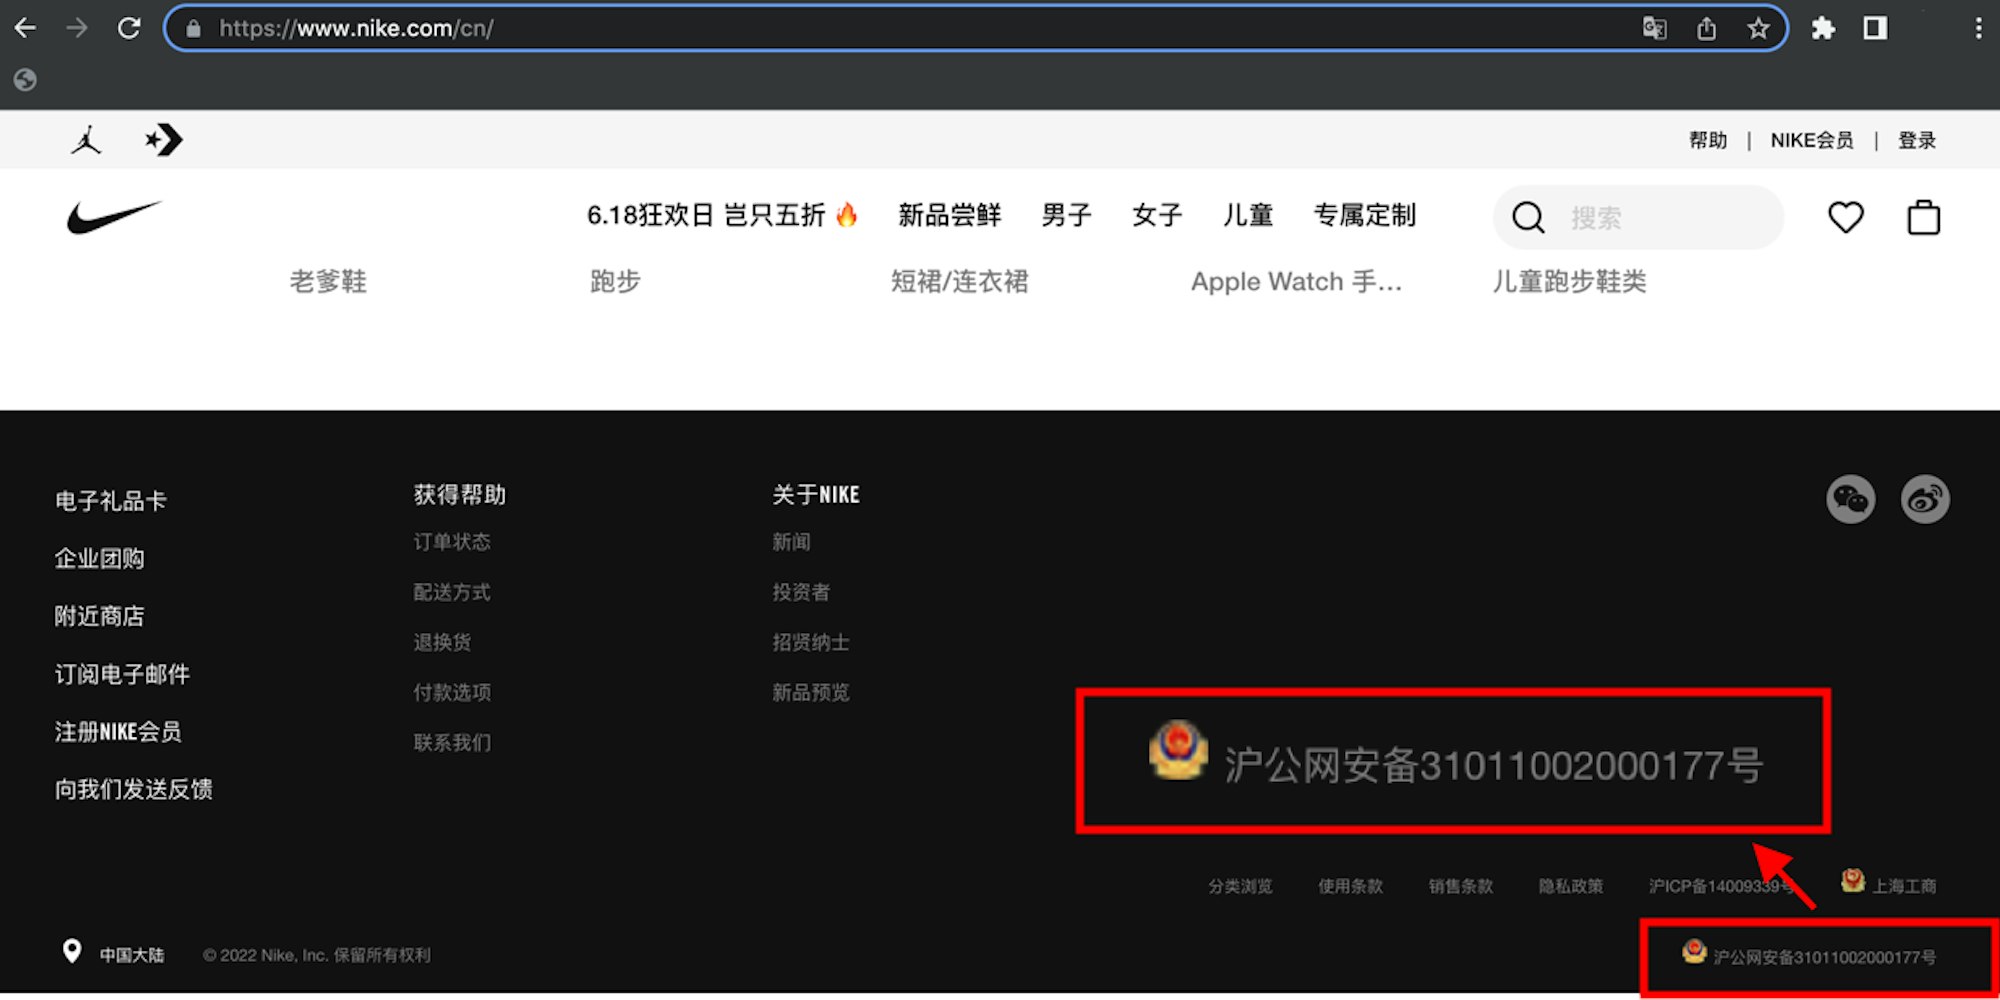 ICP license number example in footer (Nike.com/cn/)